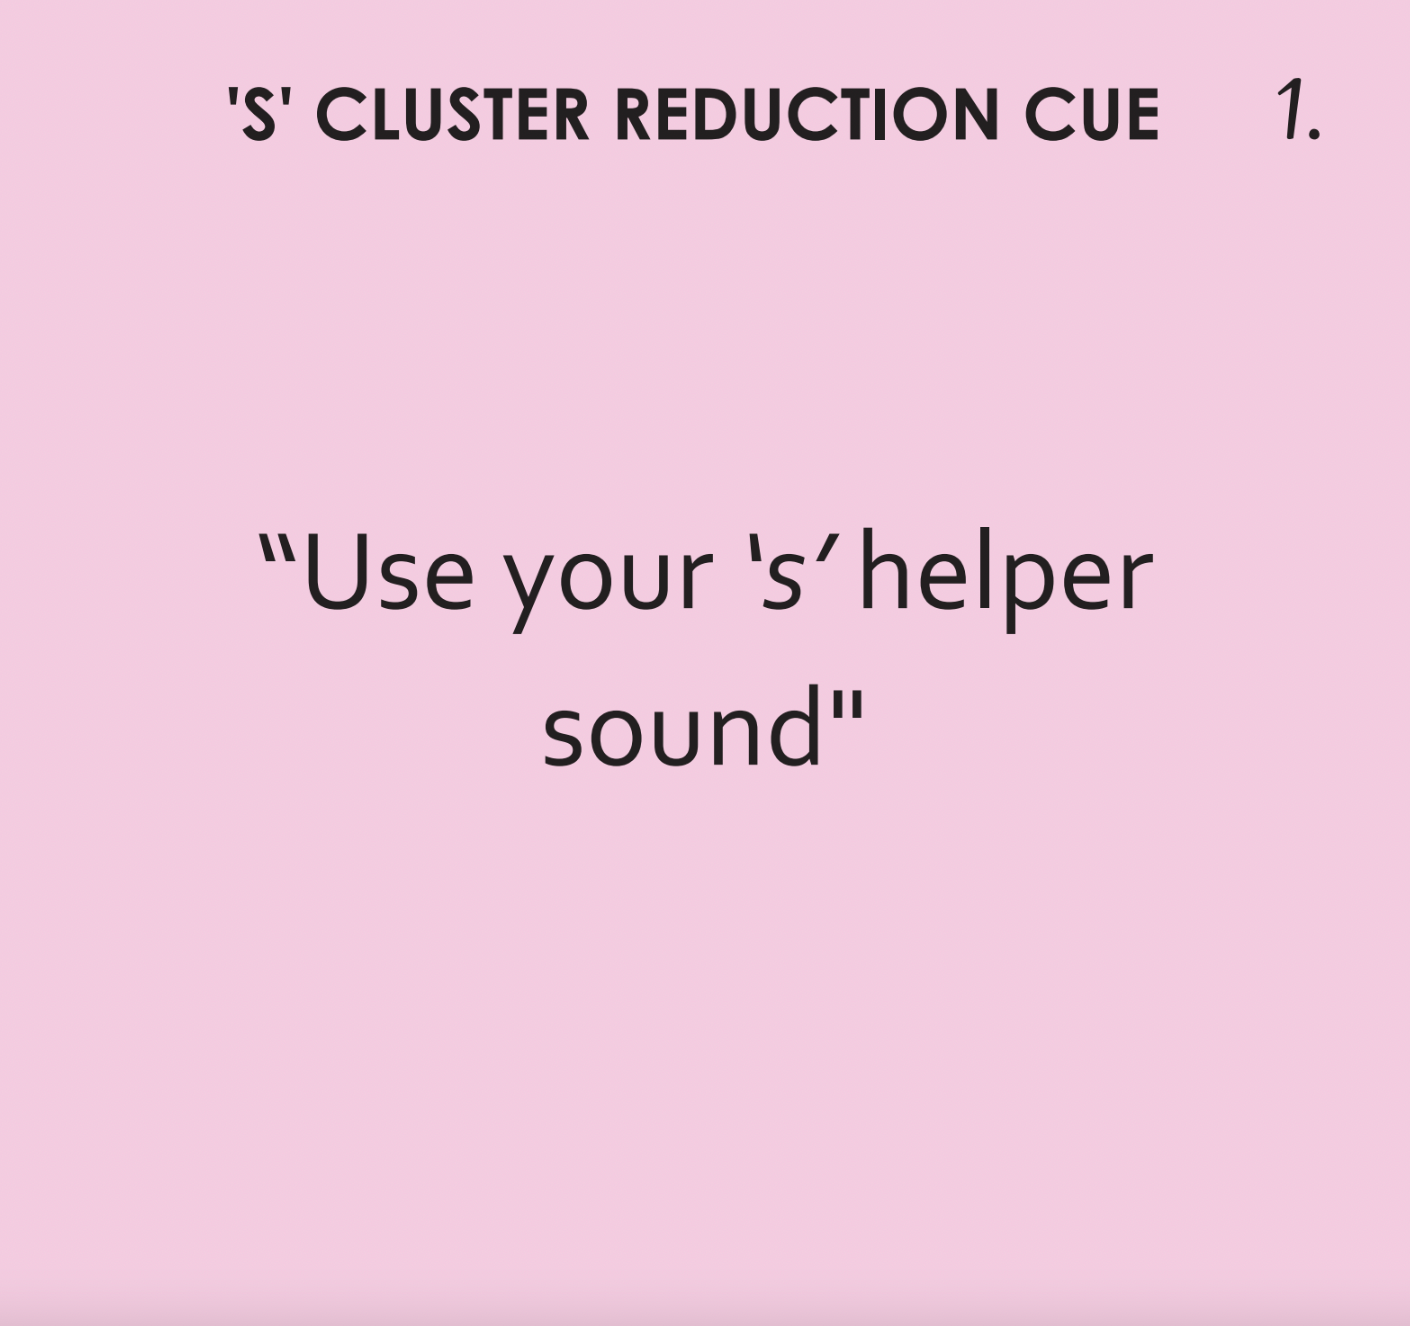 [title]Minimal Pairs: S Cluster Reduction